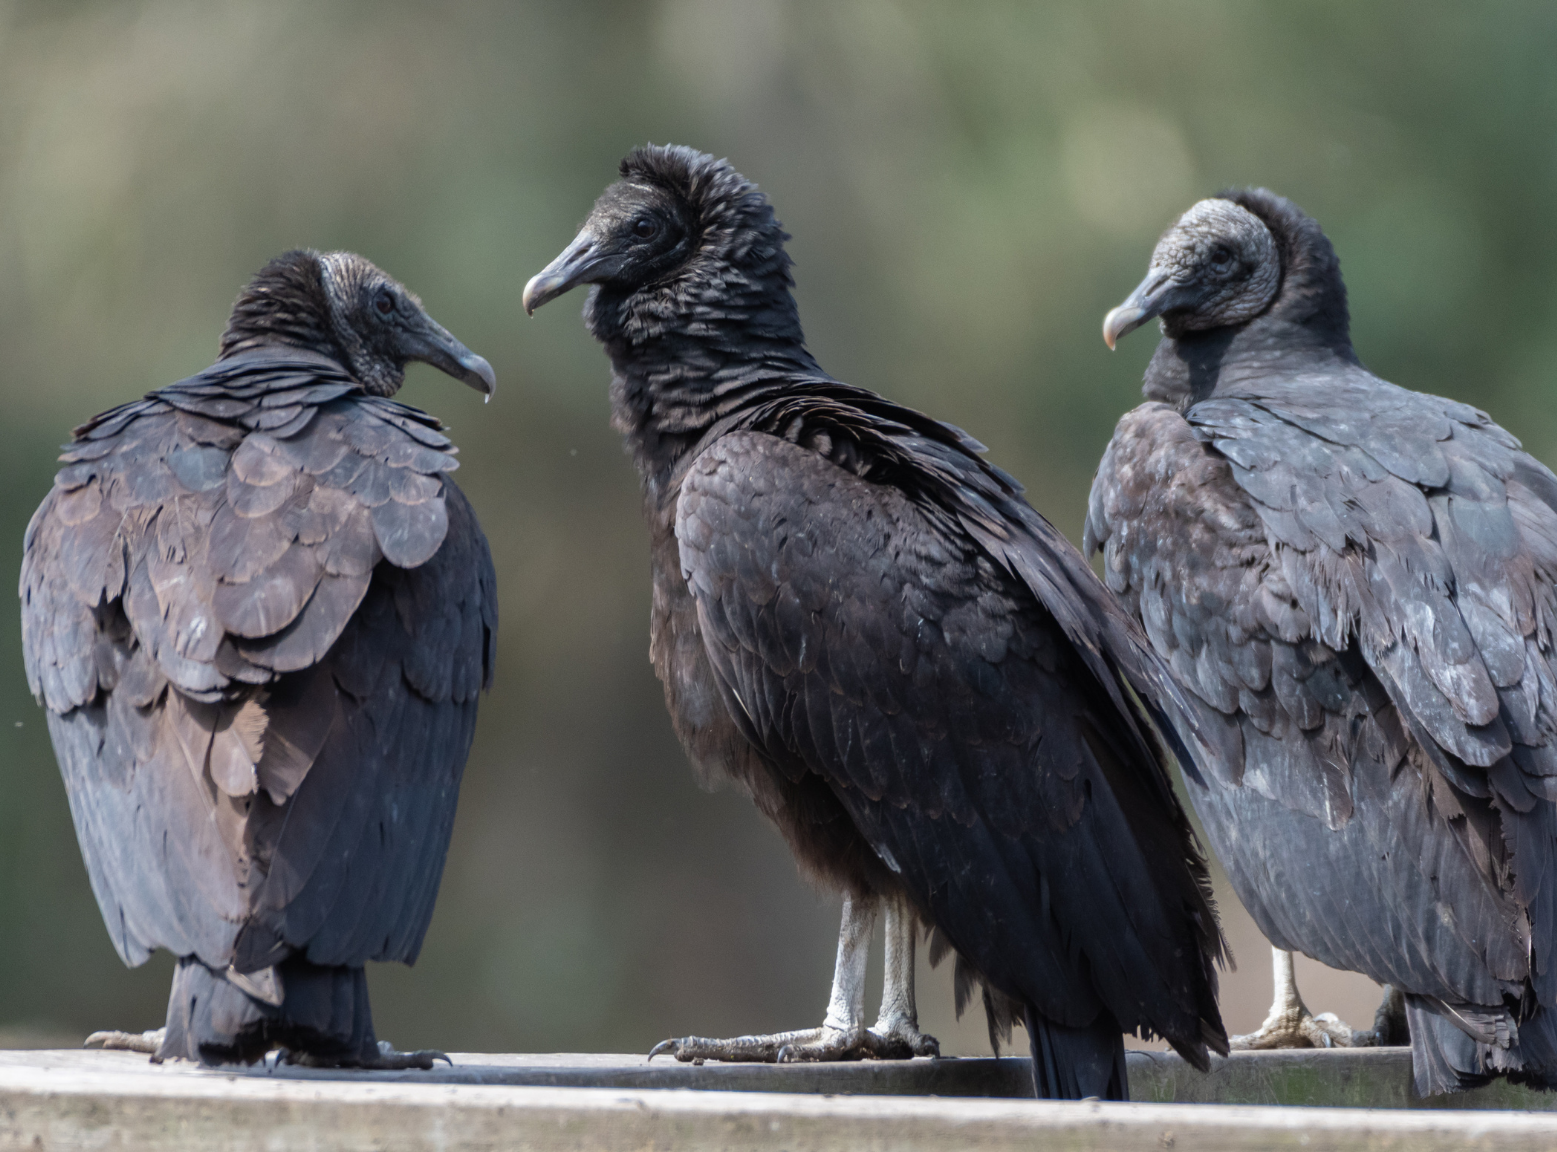 Vultures on the Rise in your Neighborhood? No Need to Move Out